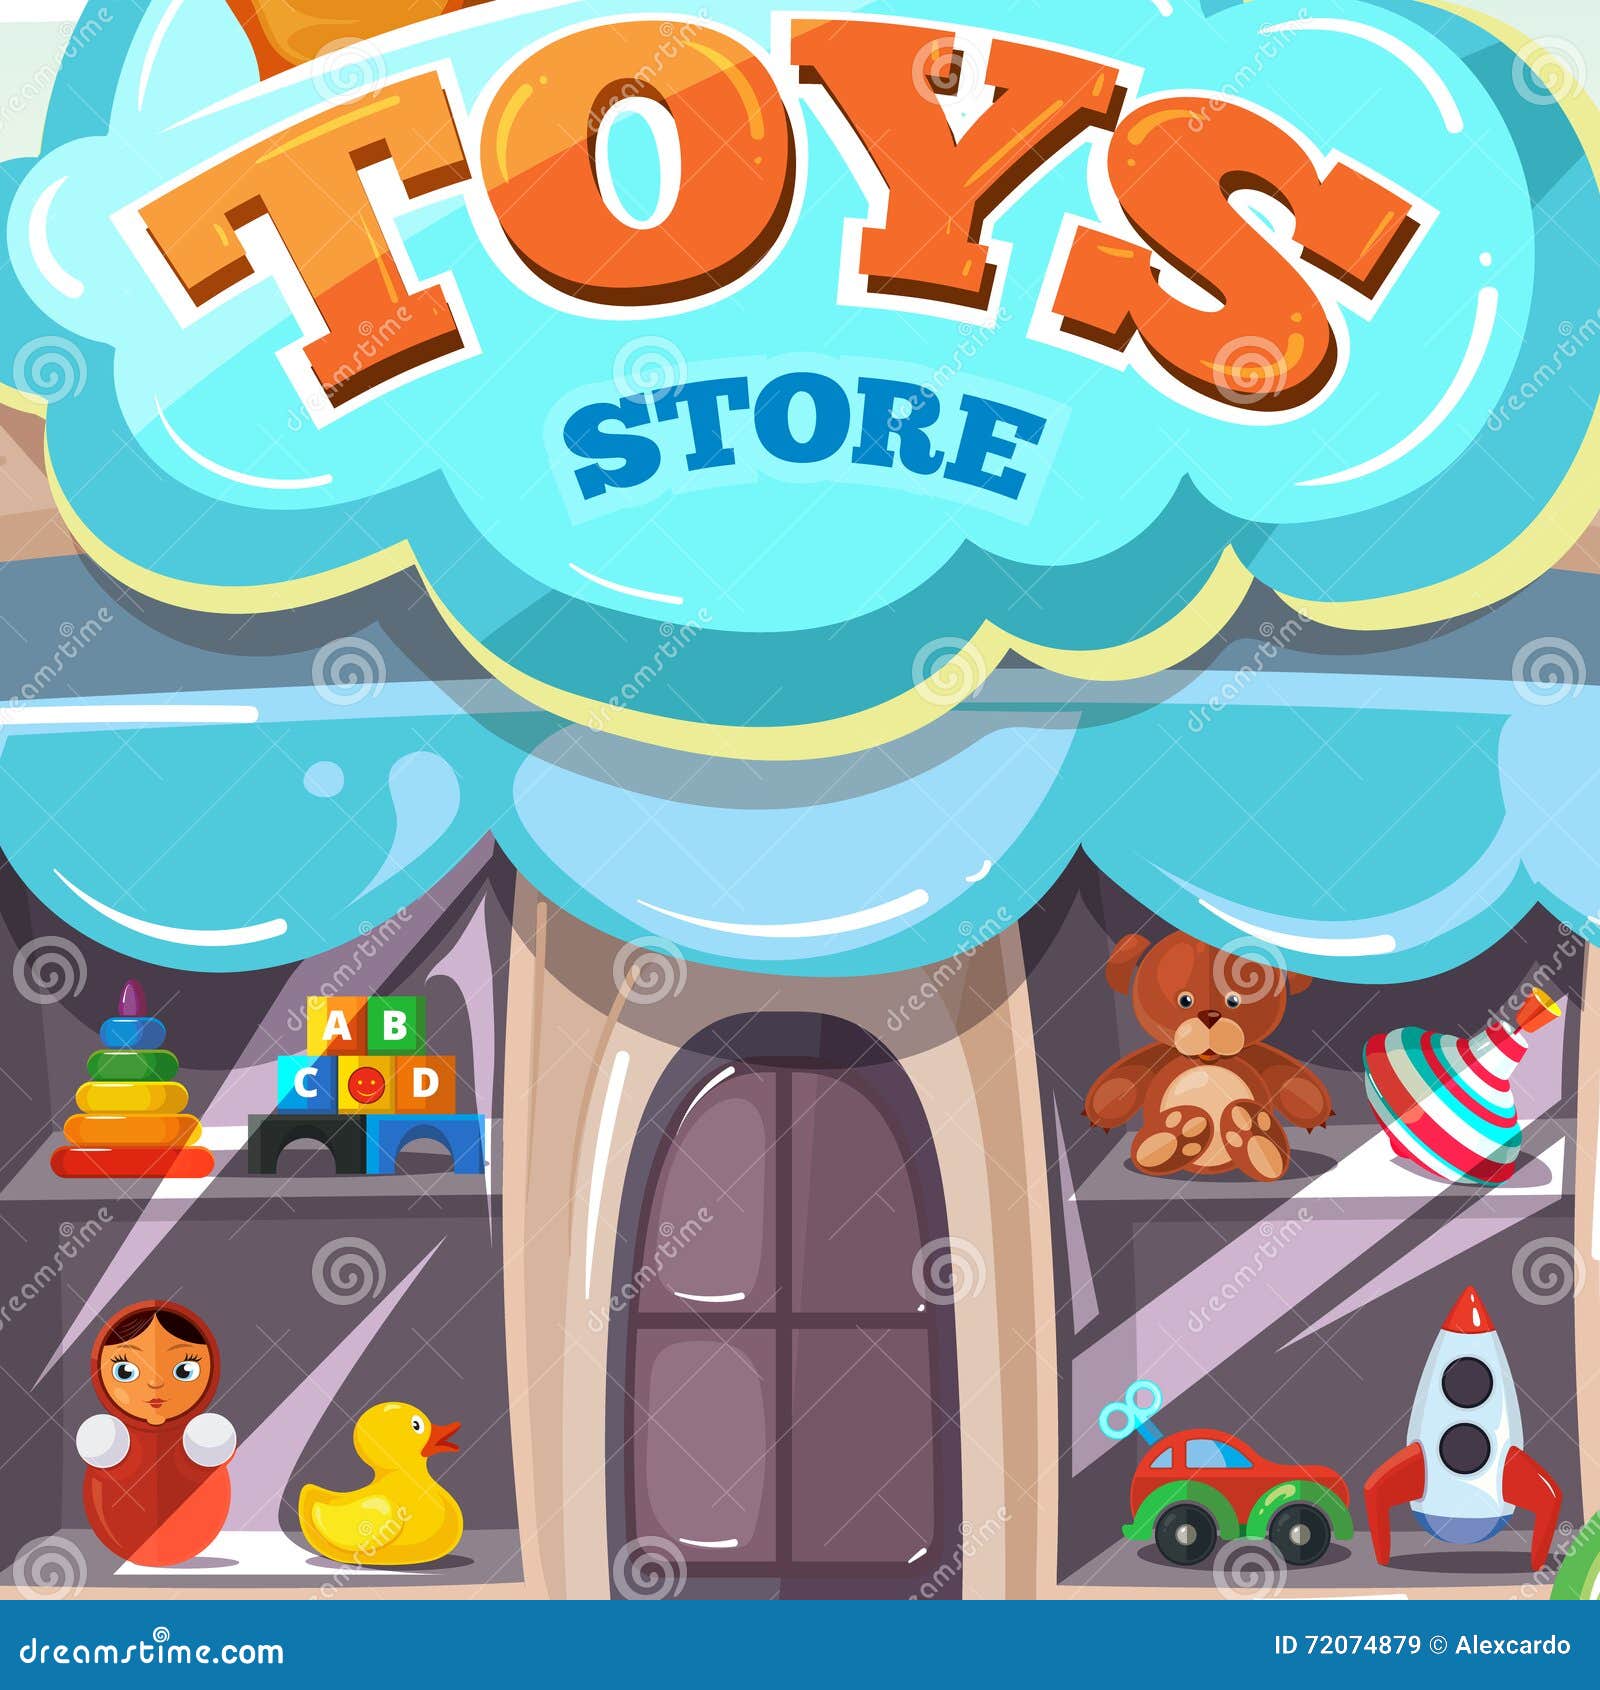 toy store clipart - photo #16